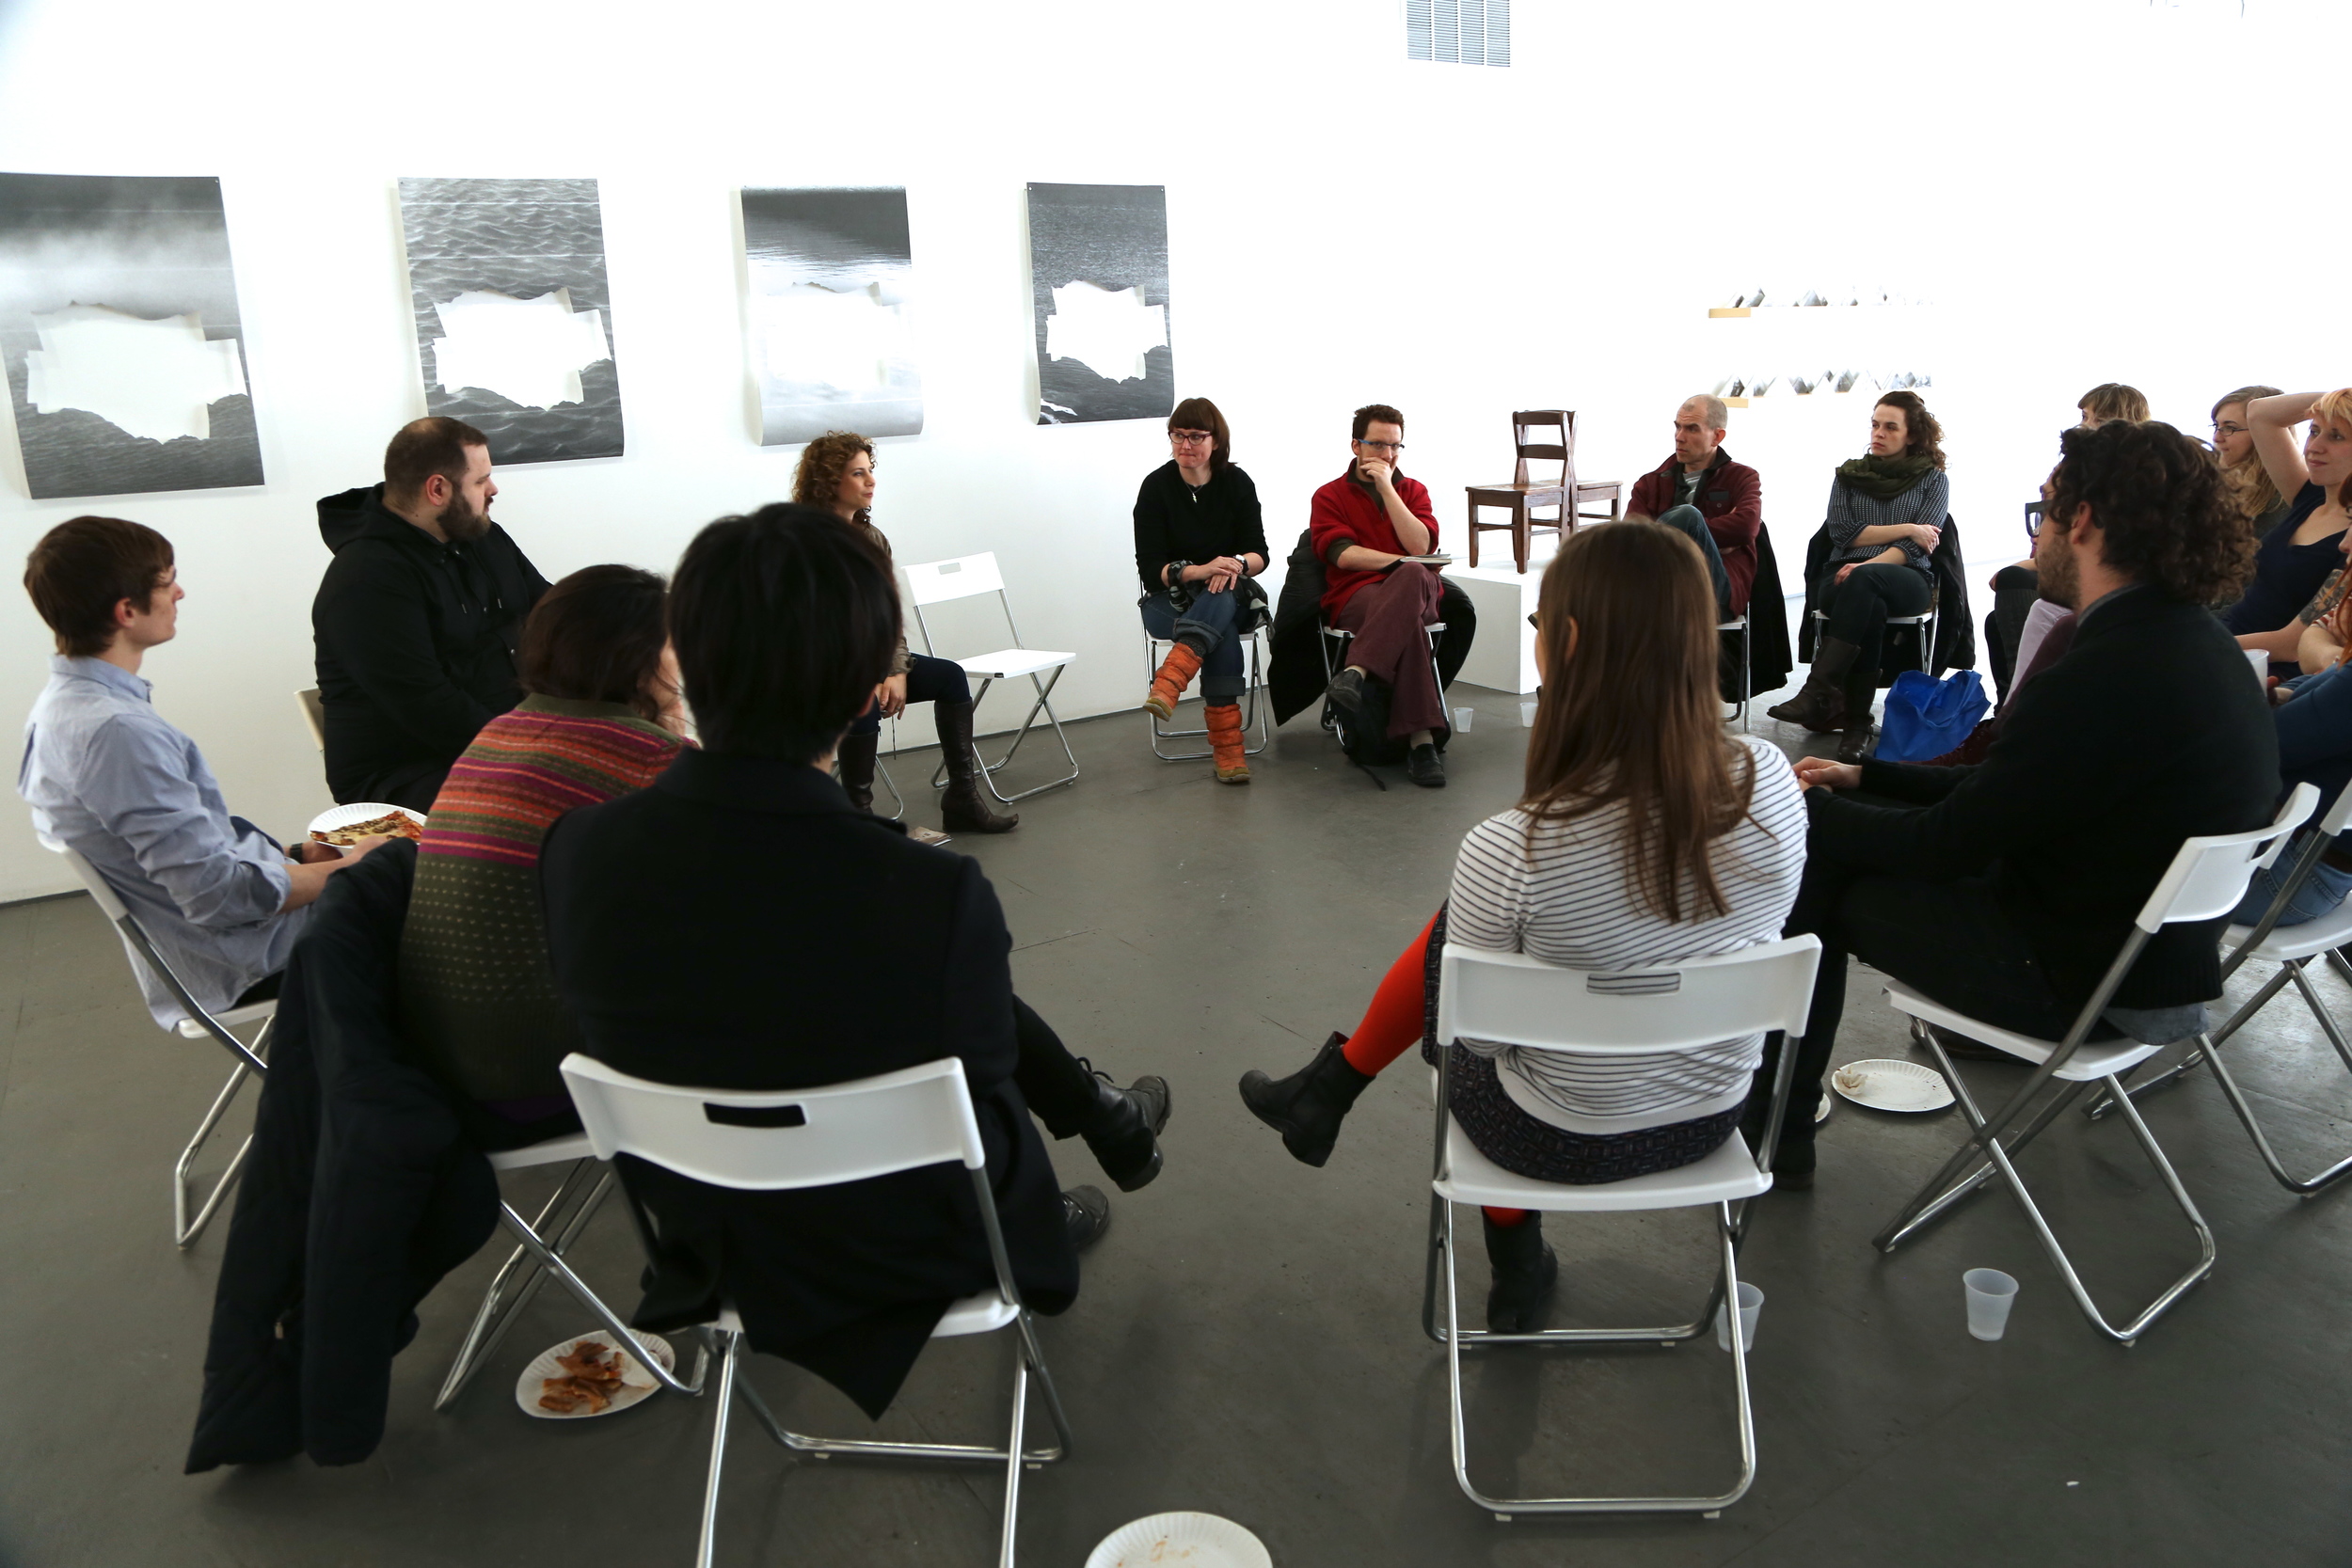  MFA Show artists get together at Chicago Artists Coallition, 2014 